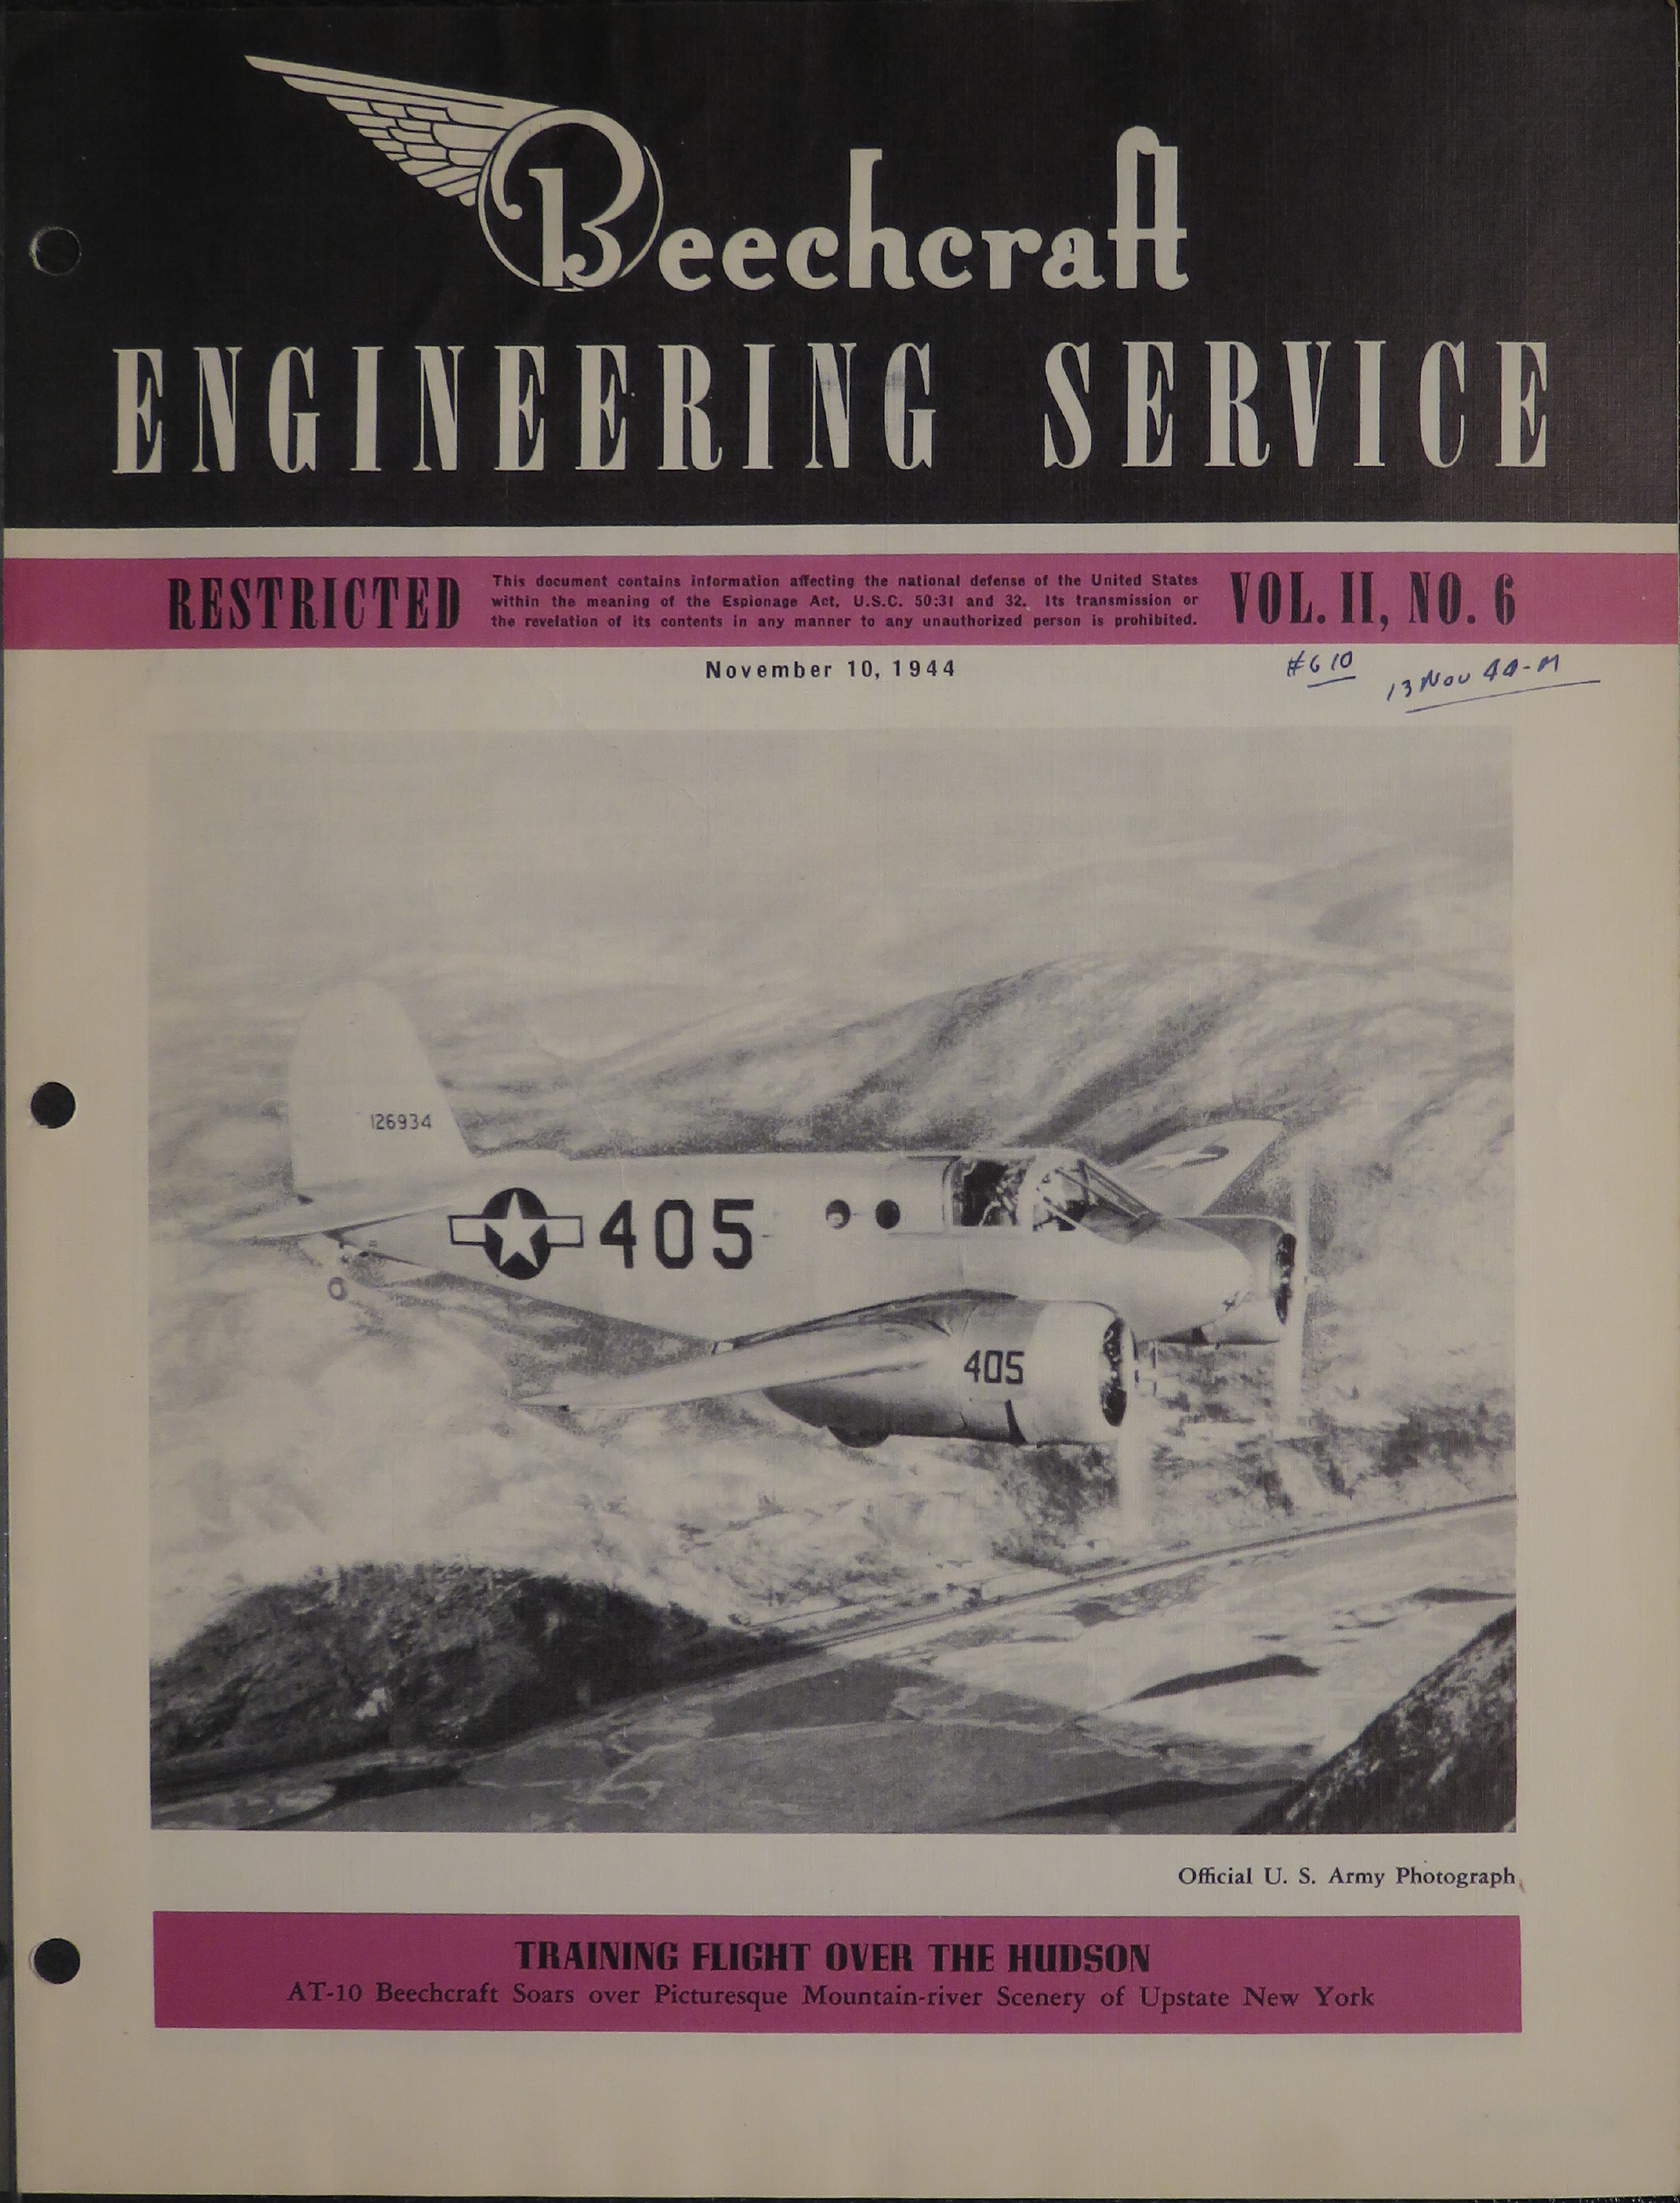 Sample page 1 from AirCorps Library document: Vol. II, No. 6 - Beechcraft Engineering Service